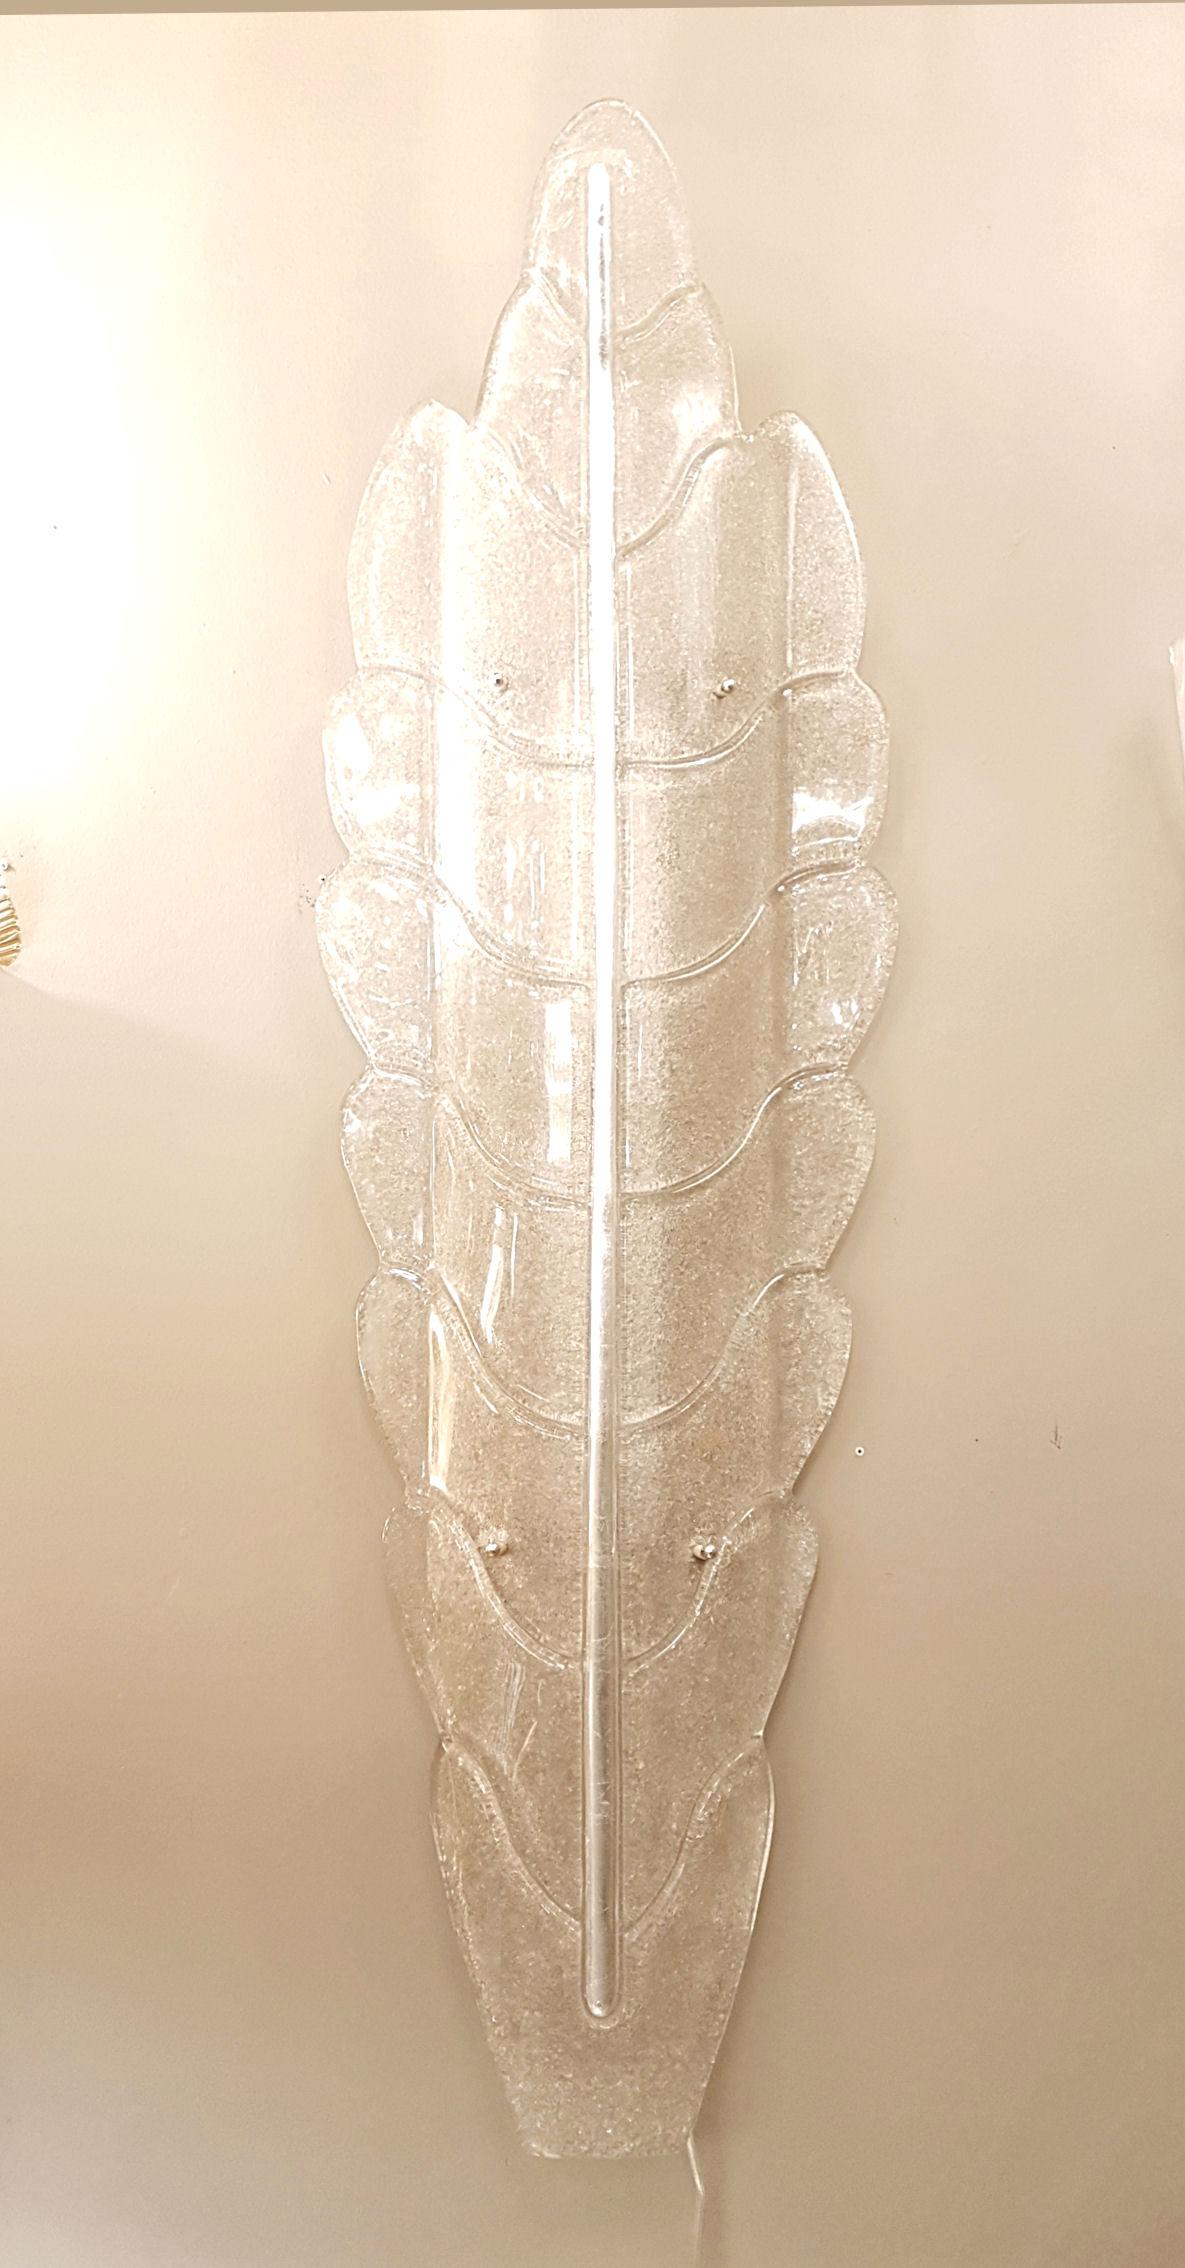 Pair of Mid-Century Modern extra large leaf sconces in Murano glass, silver and gold on beige hues glass. 
Attributed to Barovier e Toso, Murano, Italy 1970s.
One single piece of thick glass. Murano handmade.
4 lights each, rewired.
    